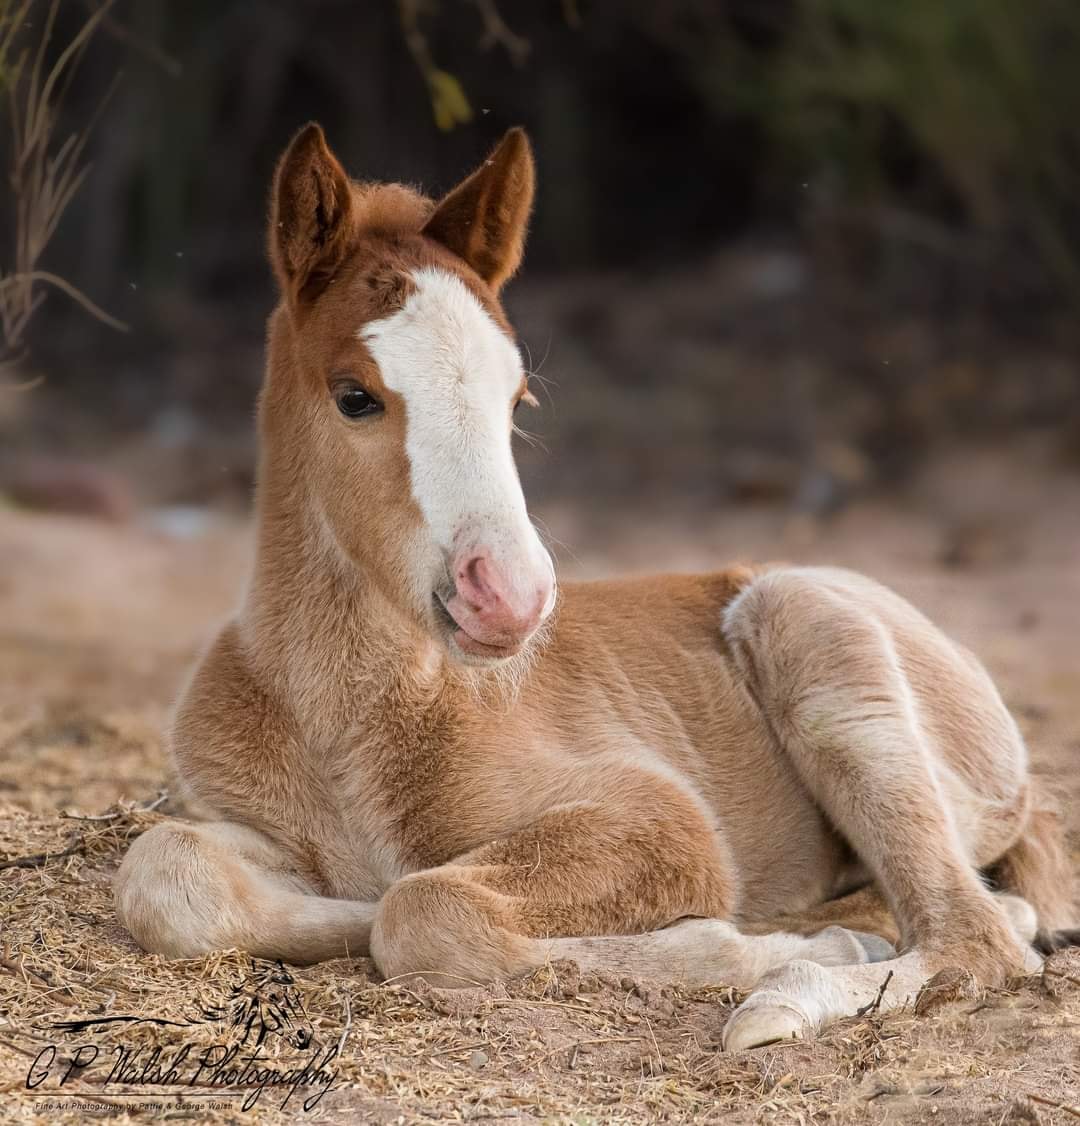 From most adorable foal of 2018